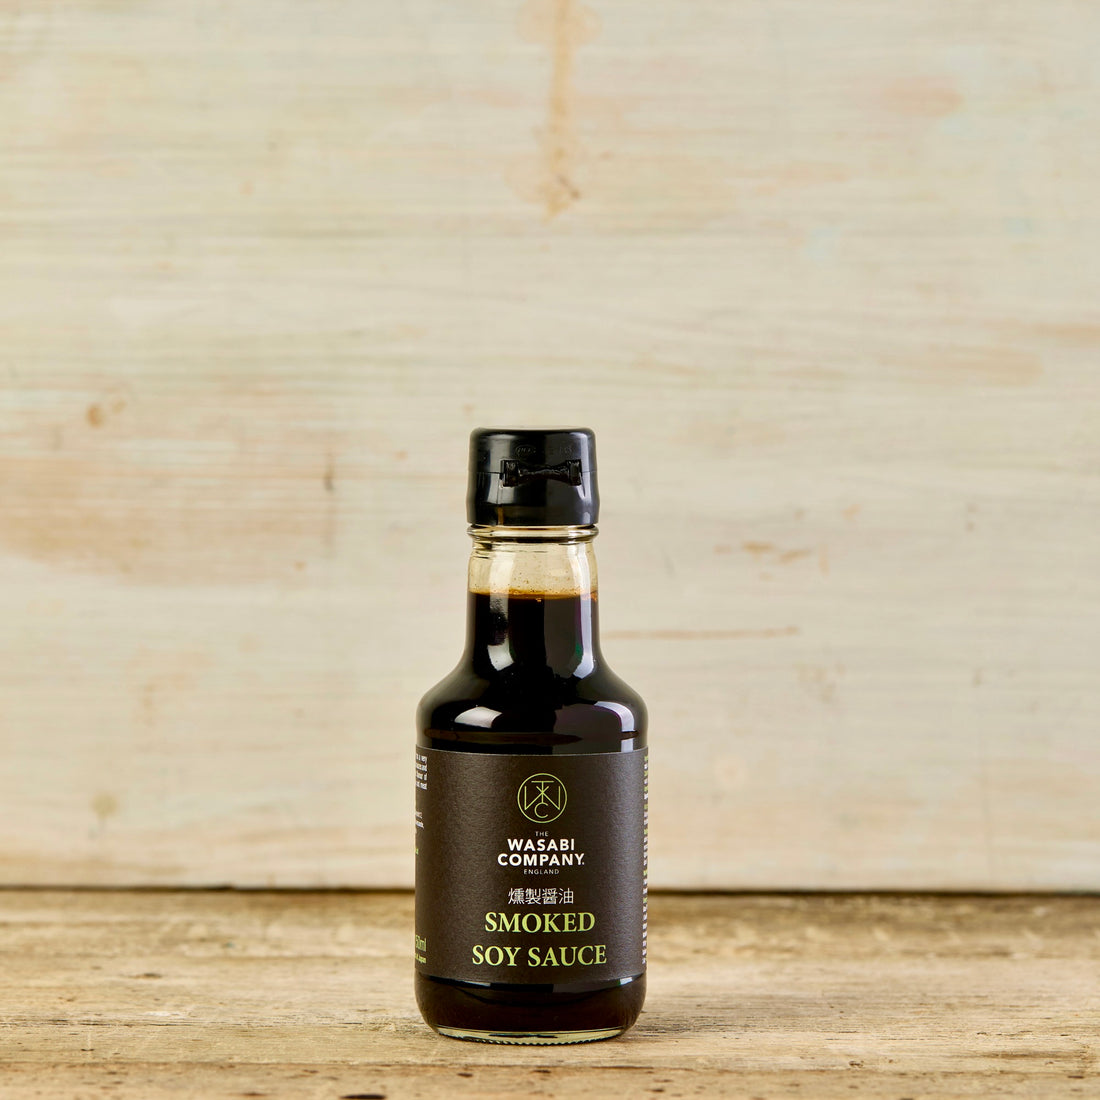 smoked soy sauce by the wasabi company